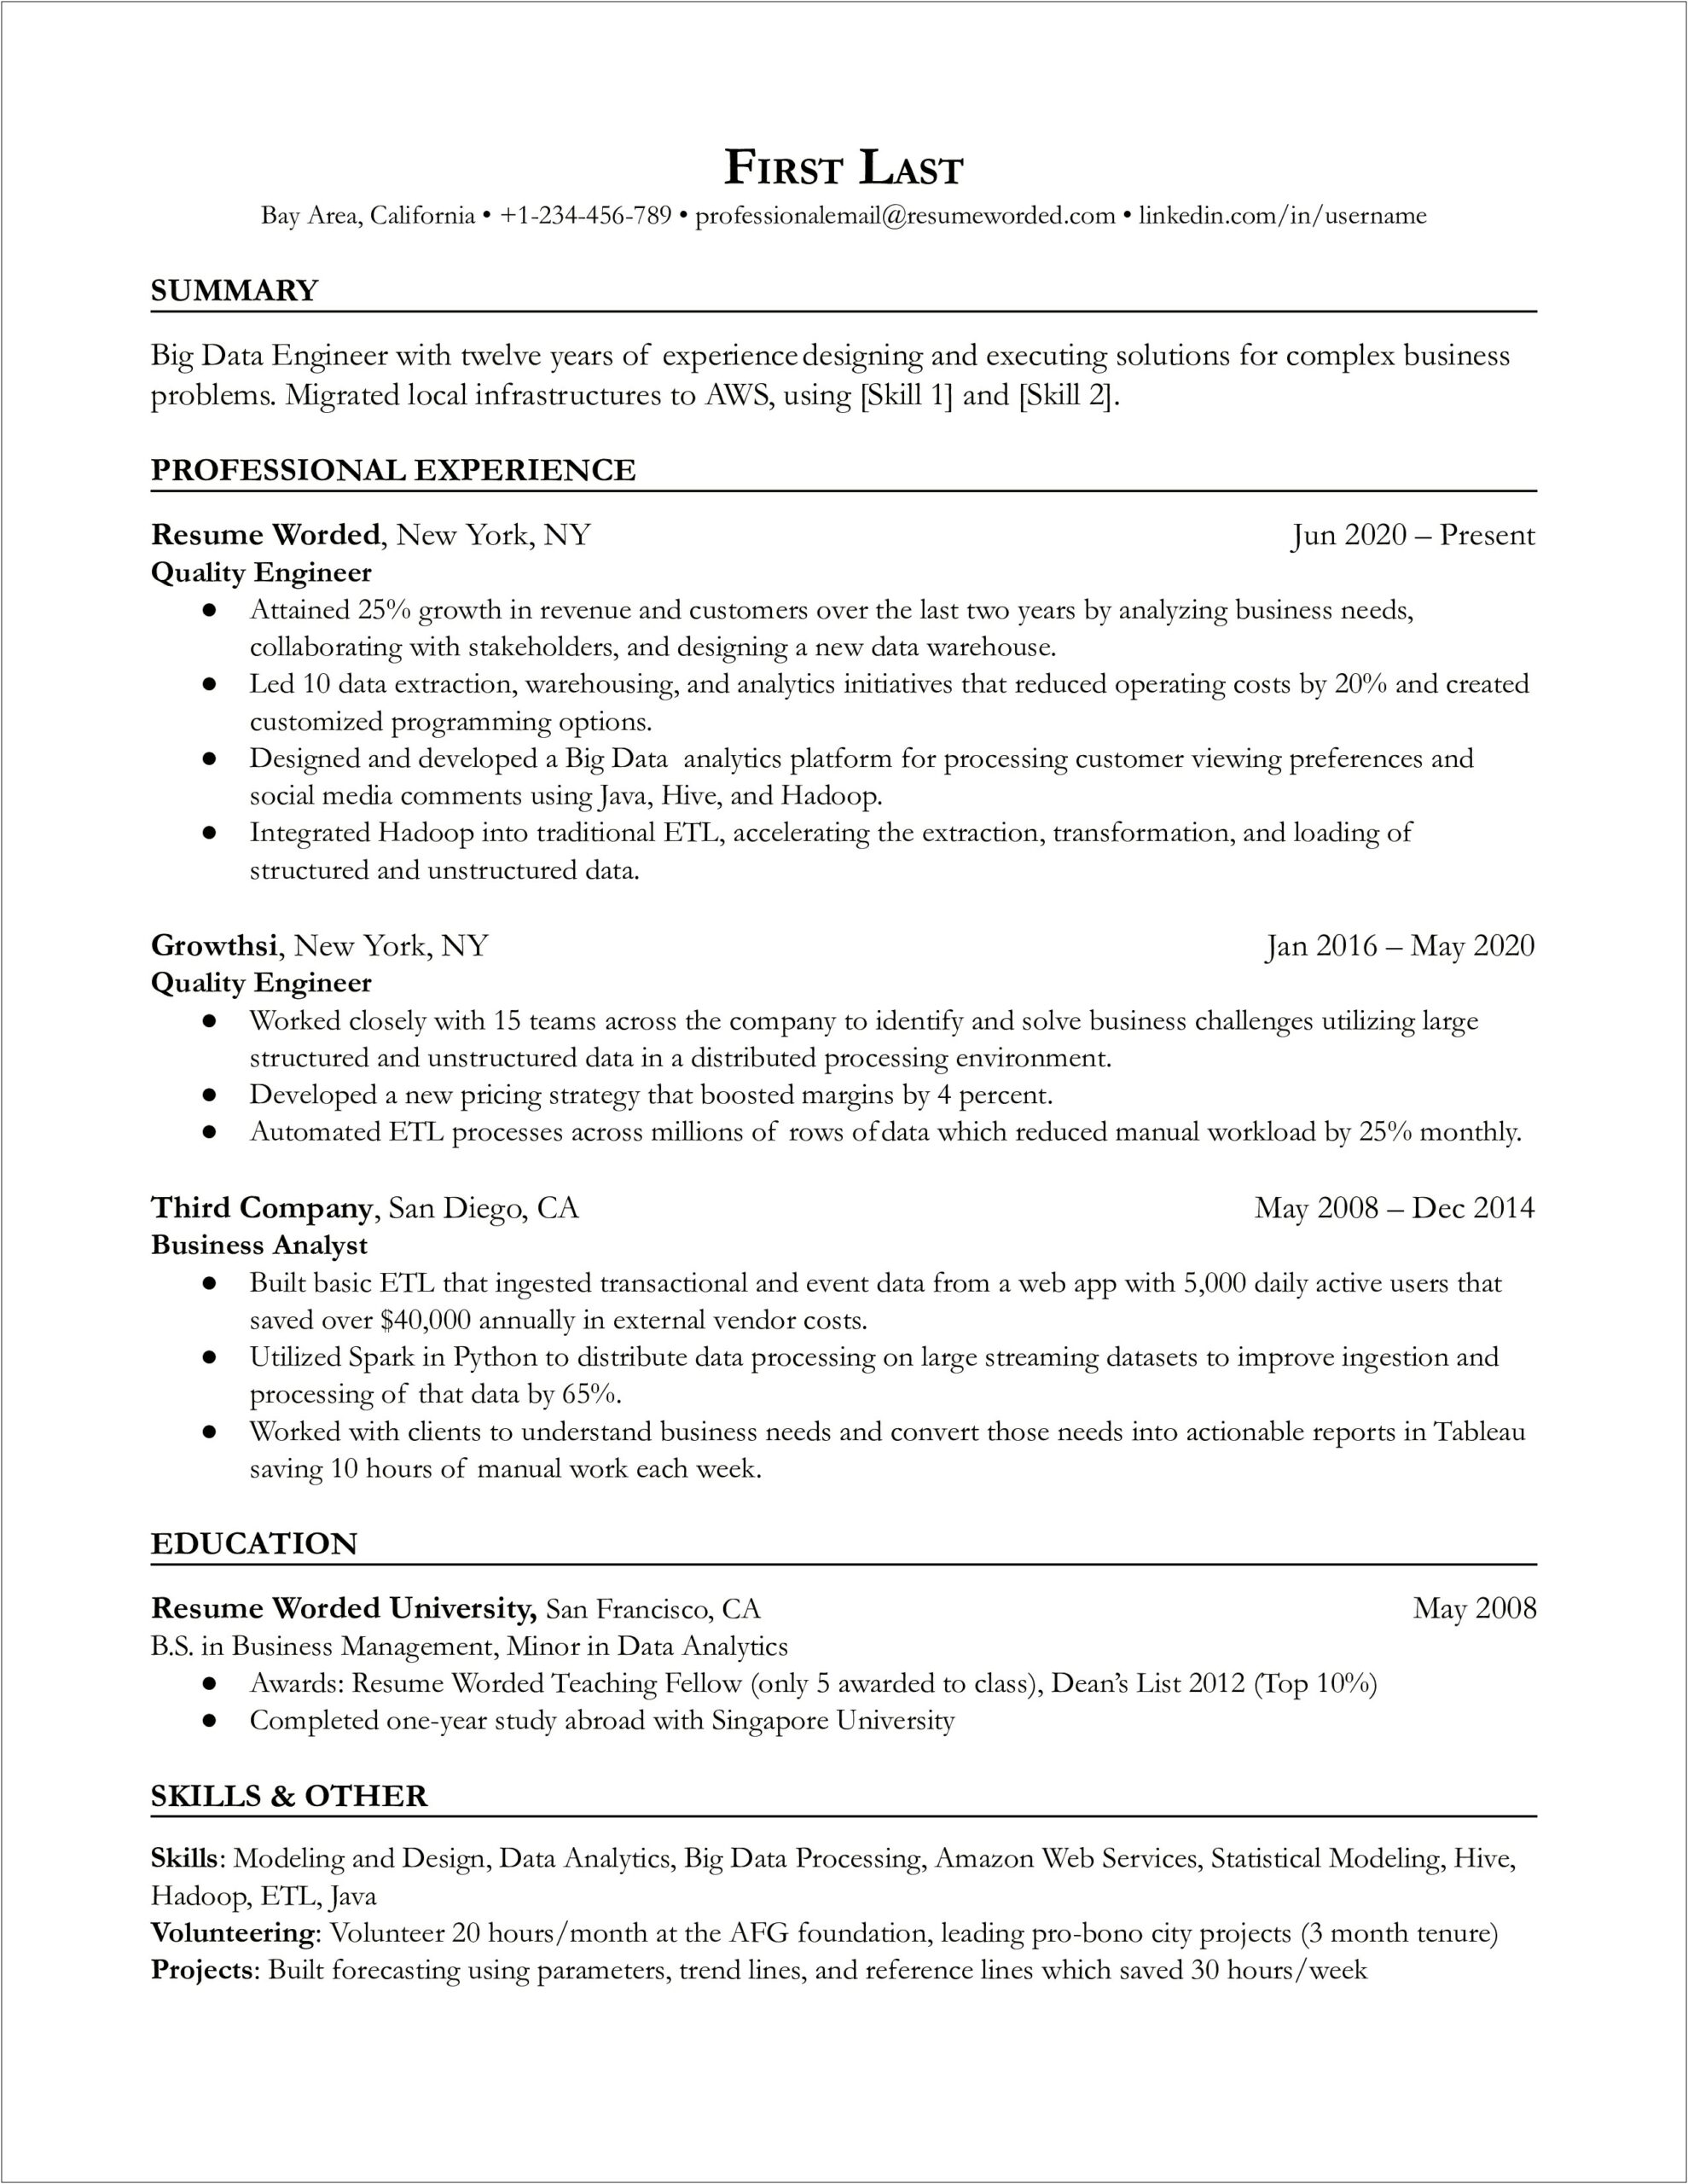 Manager's Resume For Aws And Bigdata